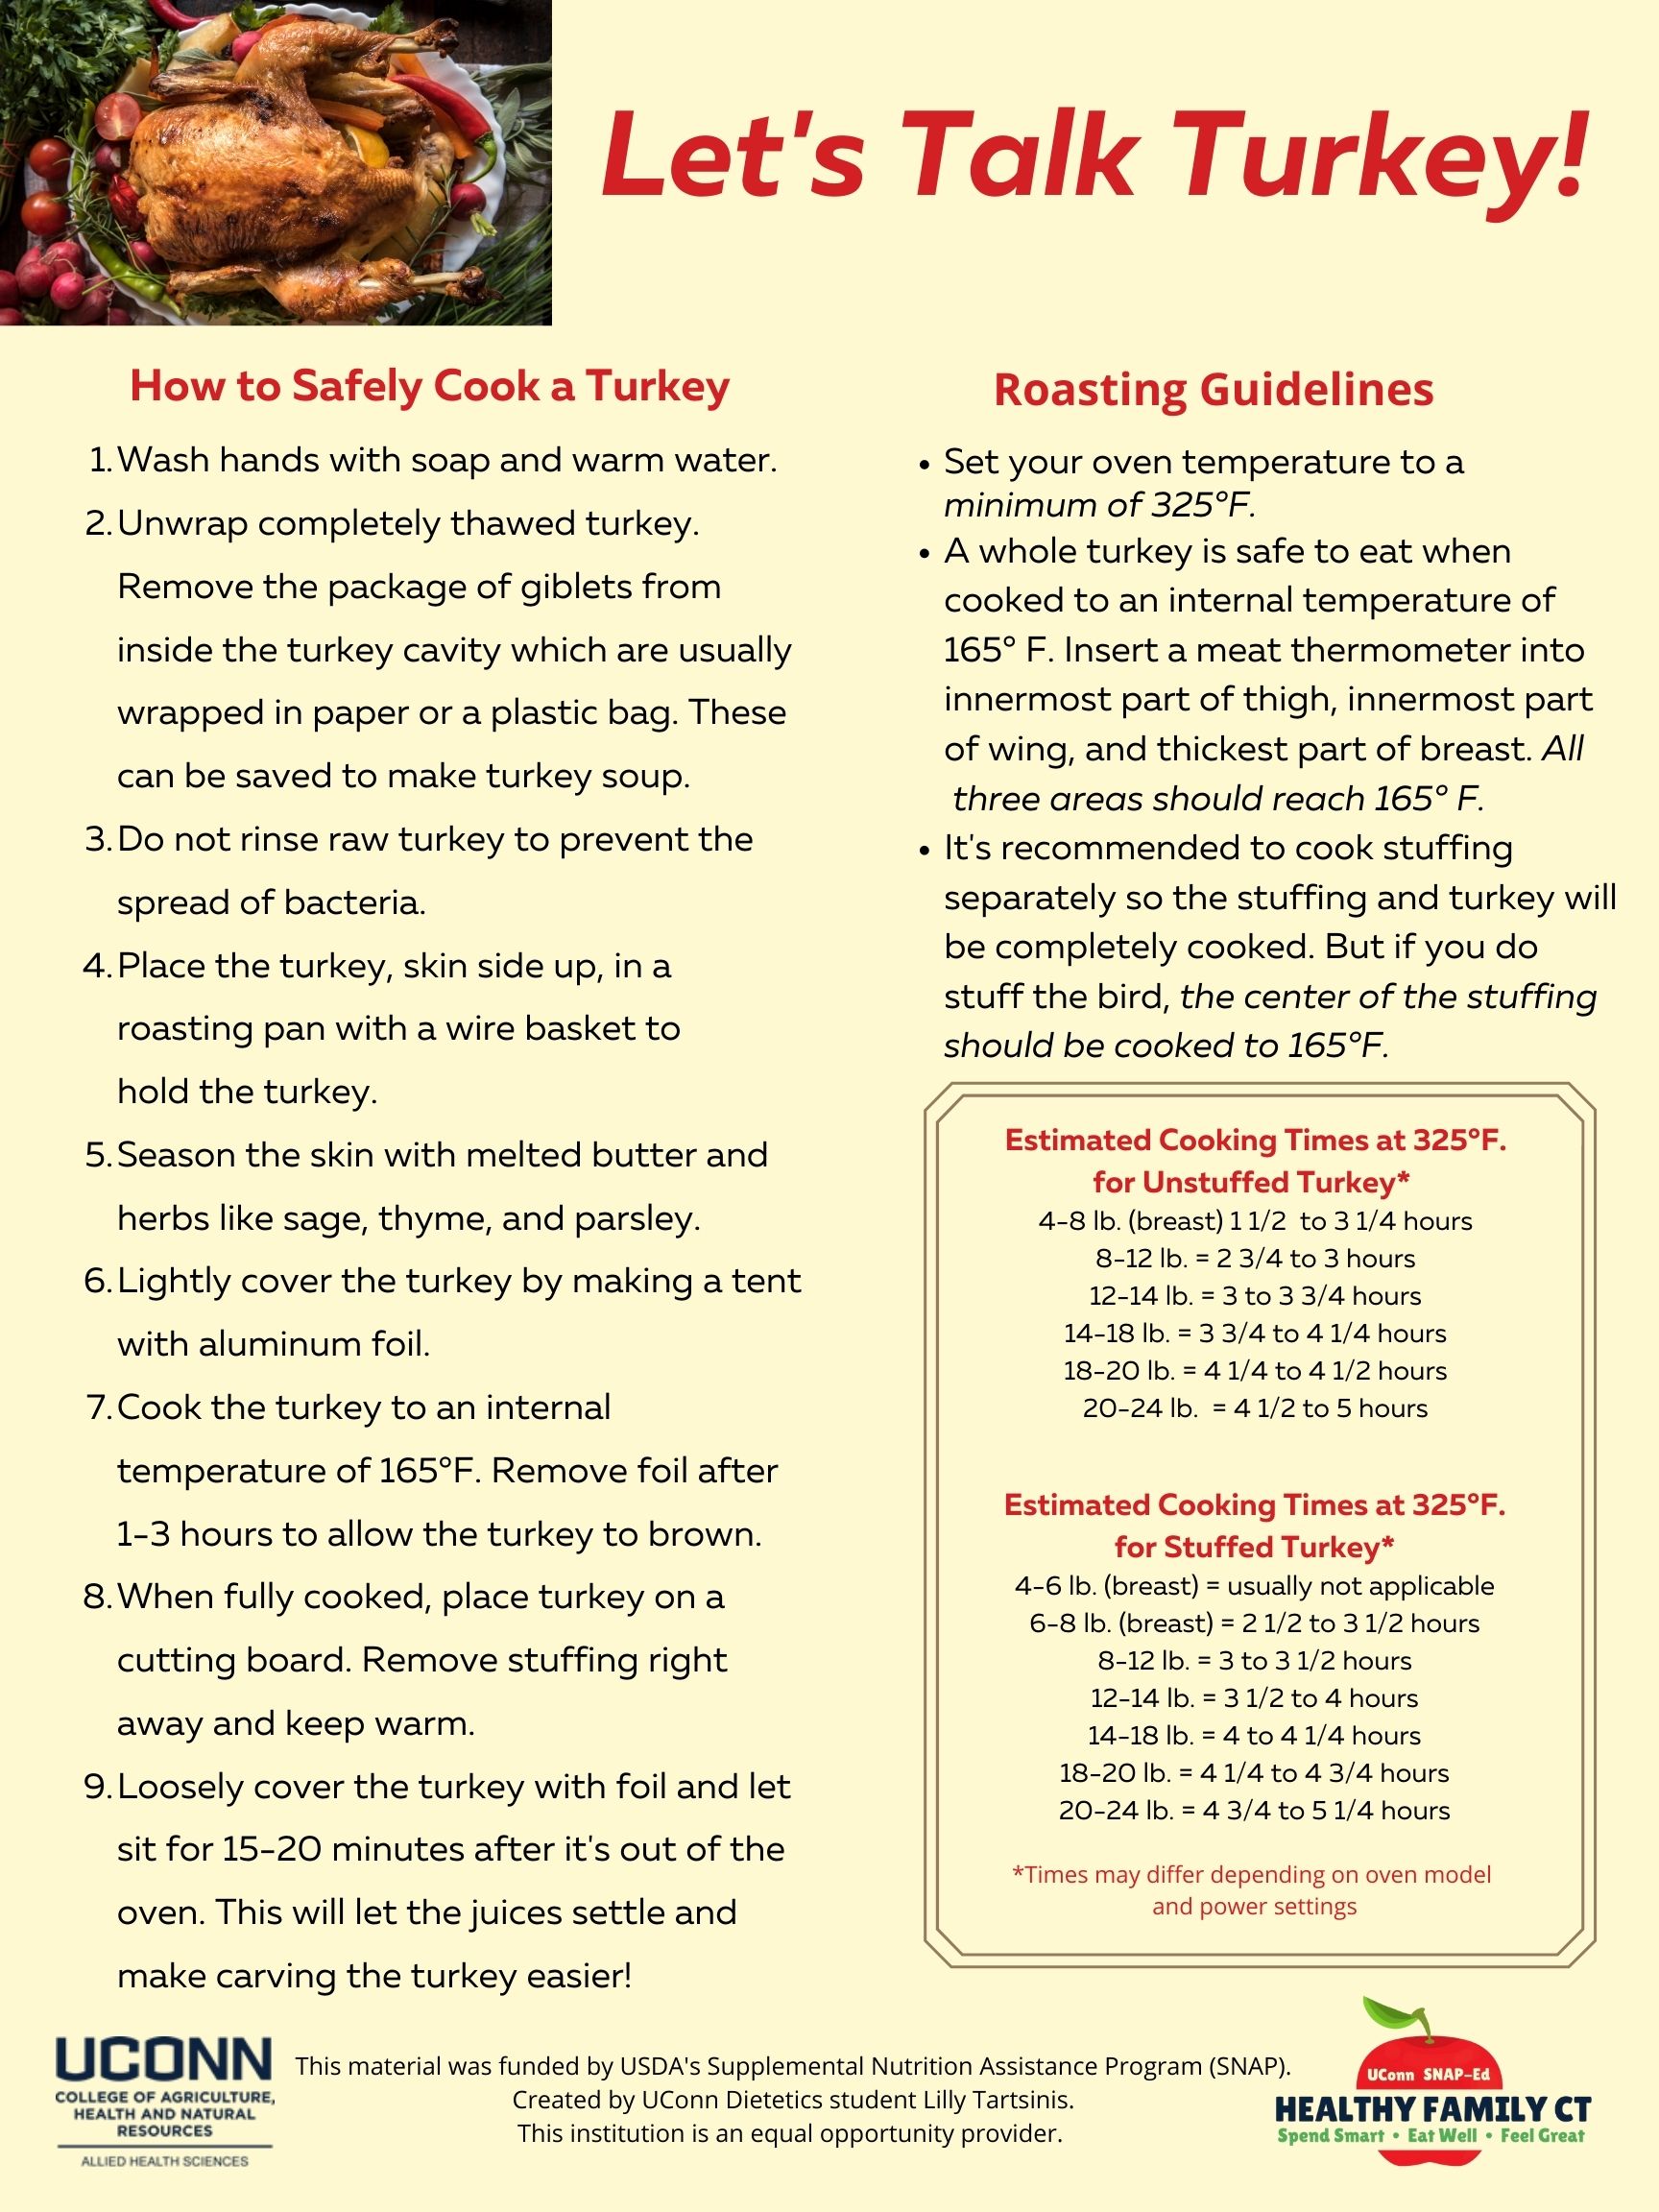 How to Safely Cook a Turkey handout